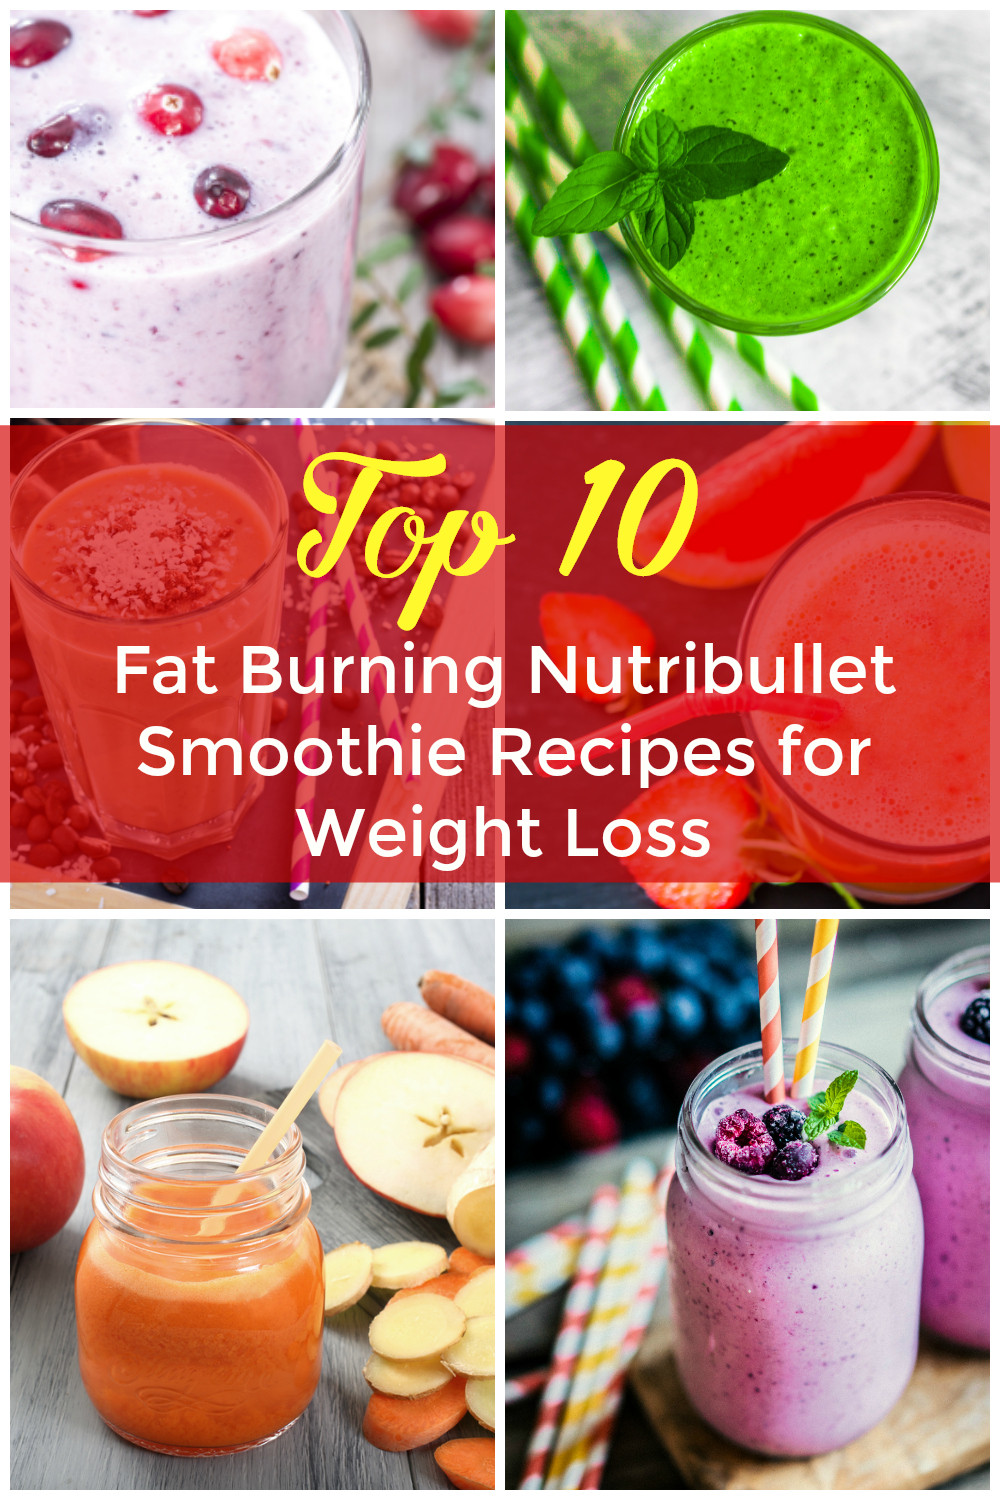 Nutribullet Recipes For Weight Loss
 Top 10 Diet Nutribullet Smoothie Recipes All Nutribullet